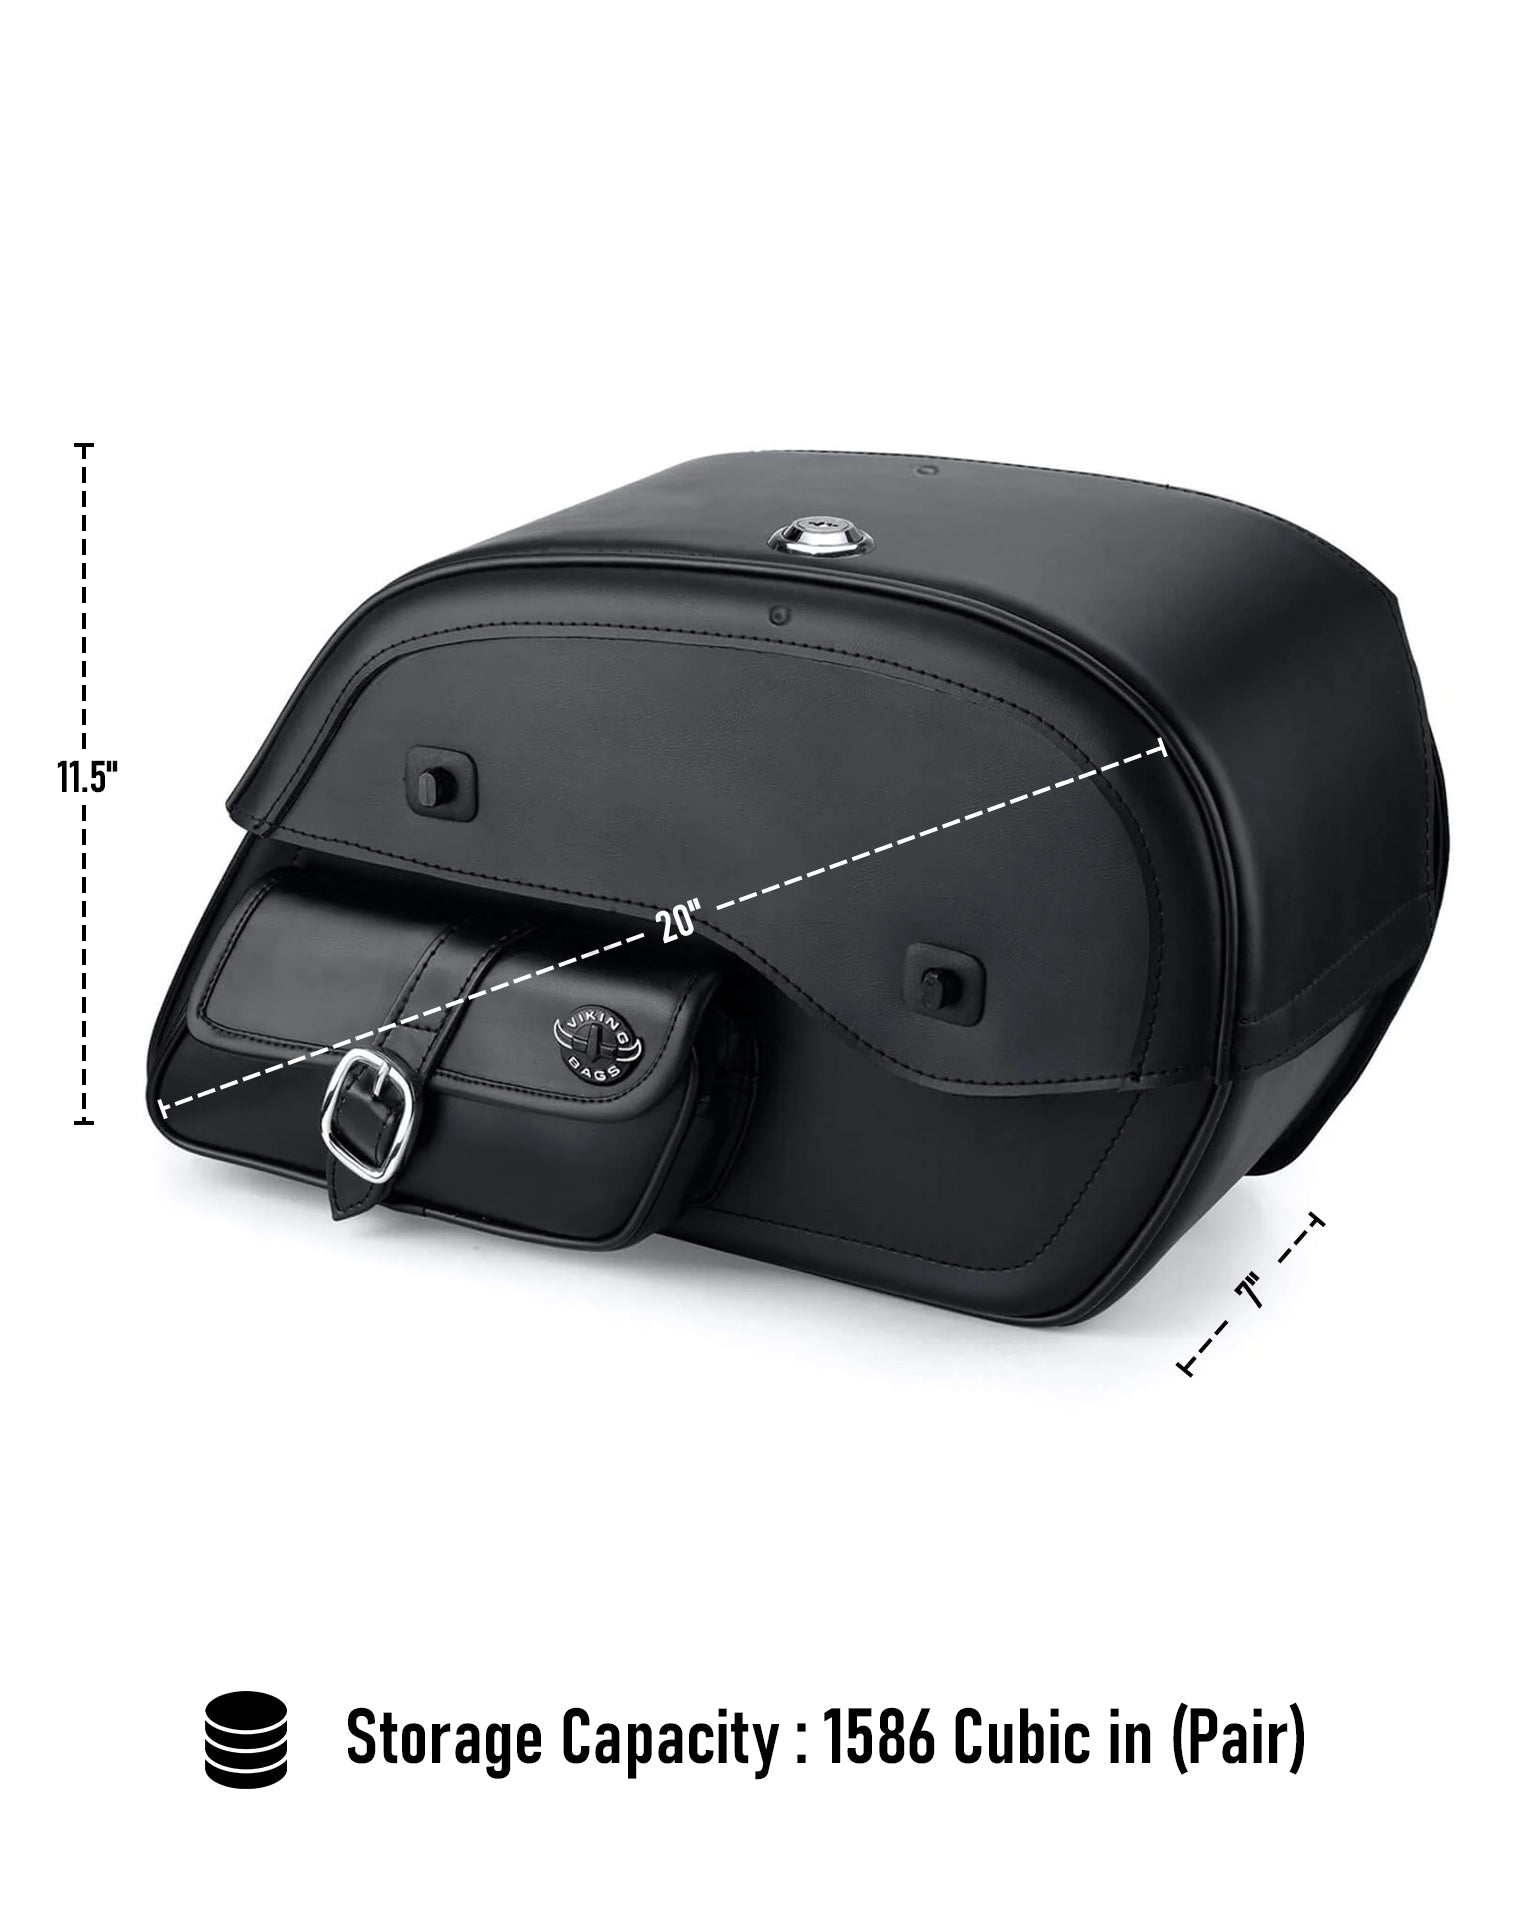 Viking Essential Side Pocket Large Shock Cutout Leather Motorcycle Saddlebags For Harley Dyna Switchback Fld Can Store Your Ridings Gears